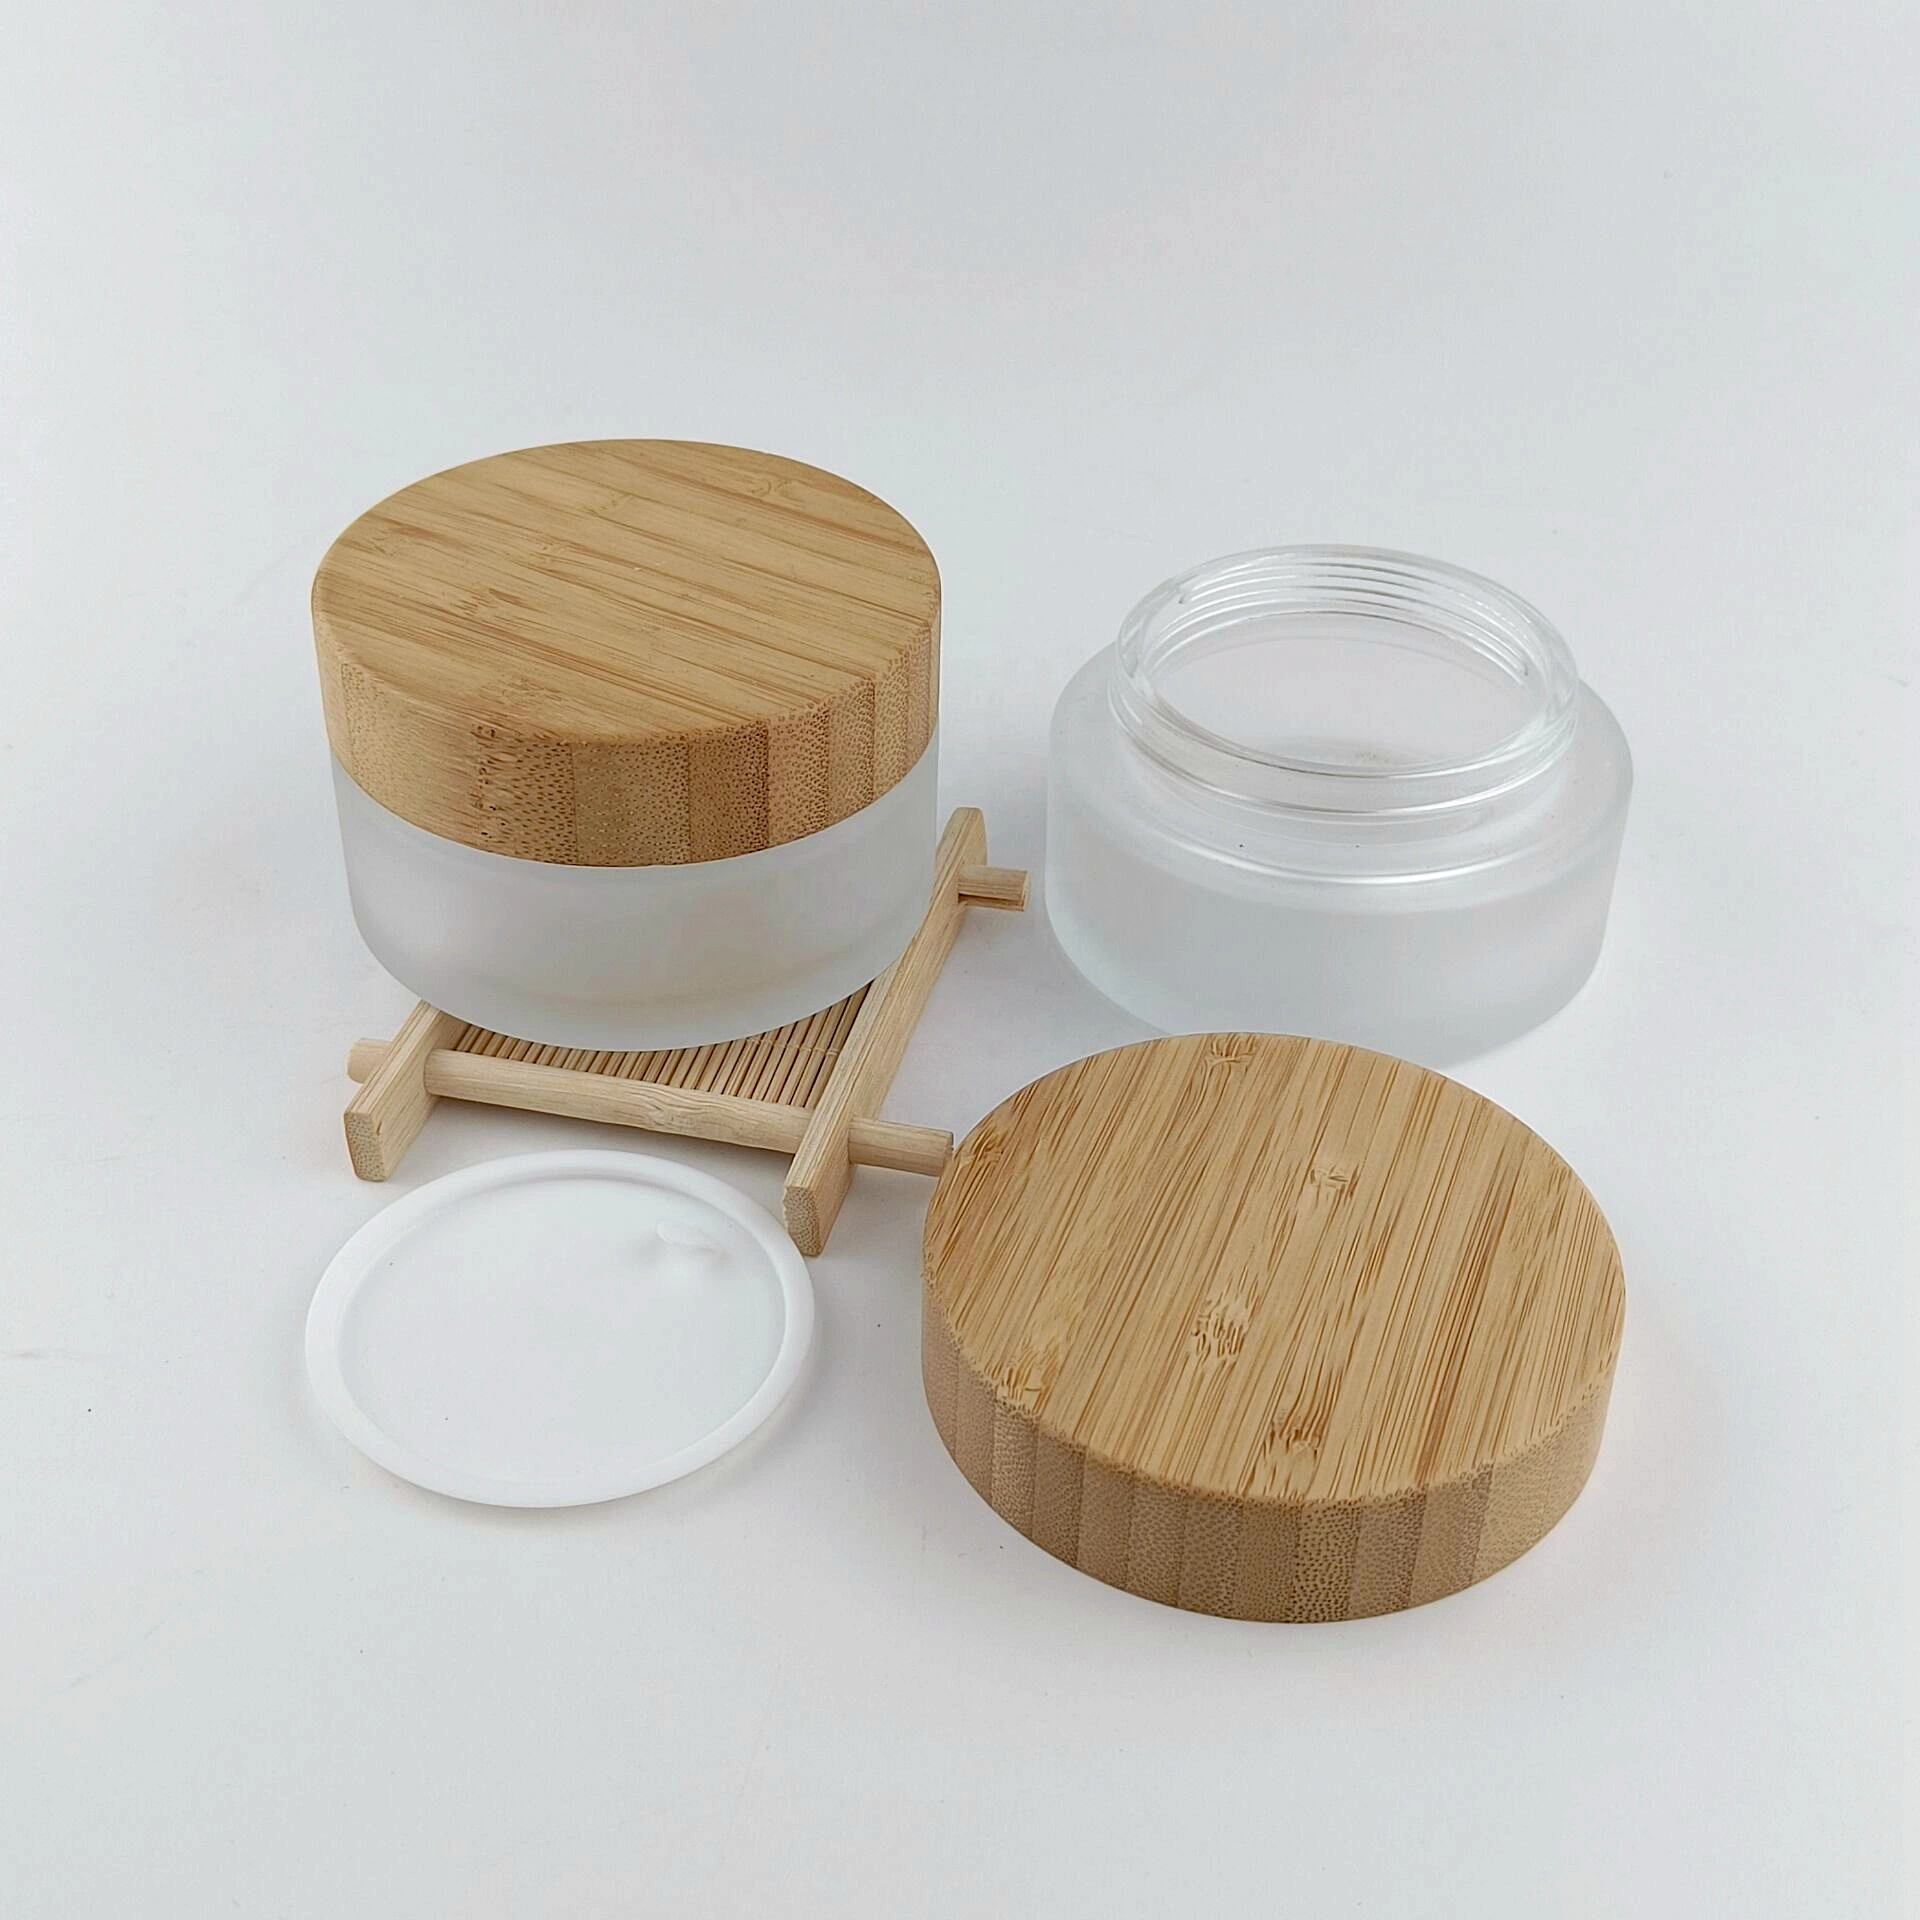 Eco-Friendly Plastic Body Skin Care Lotion 100ml Cream Jar with Bamboo Lid